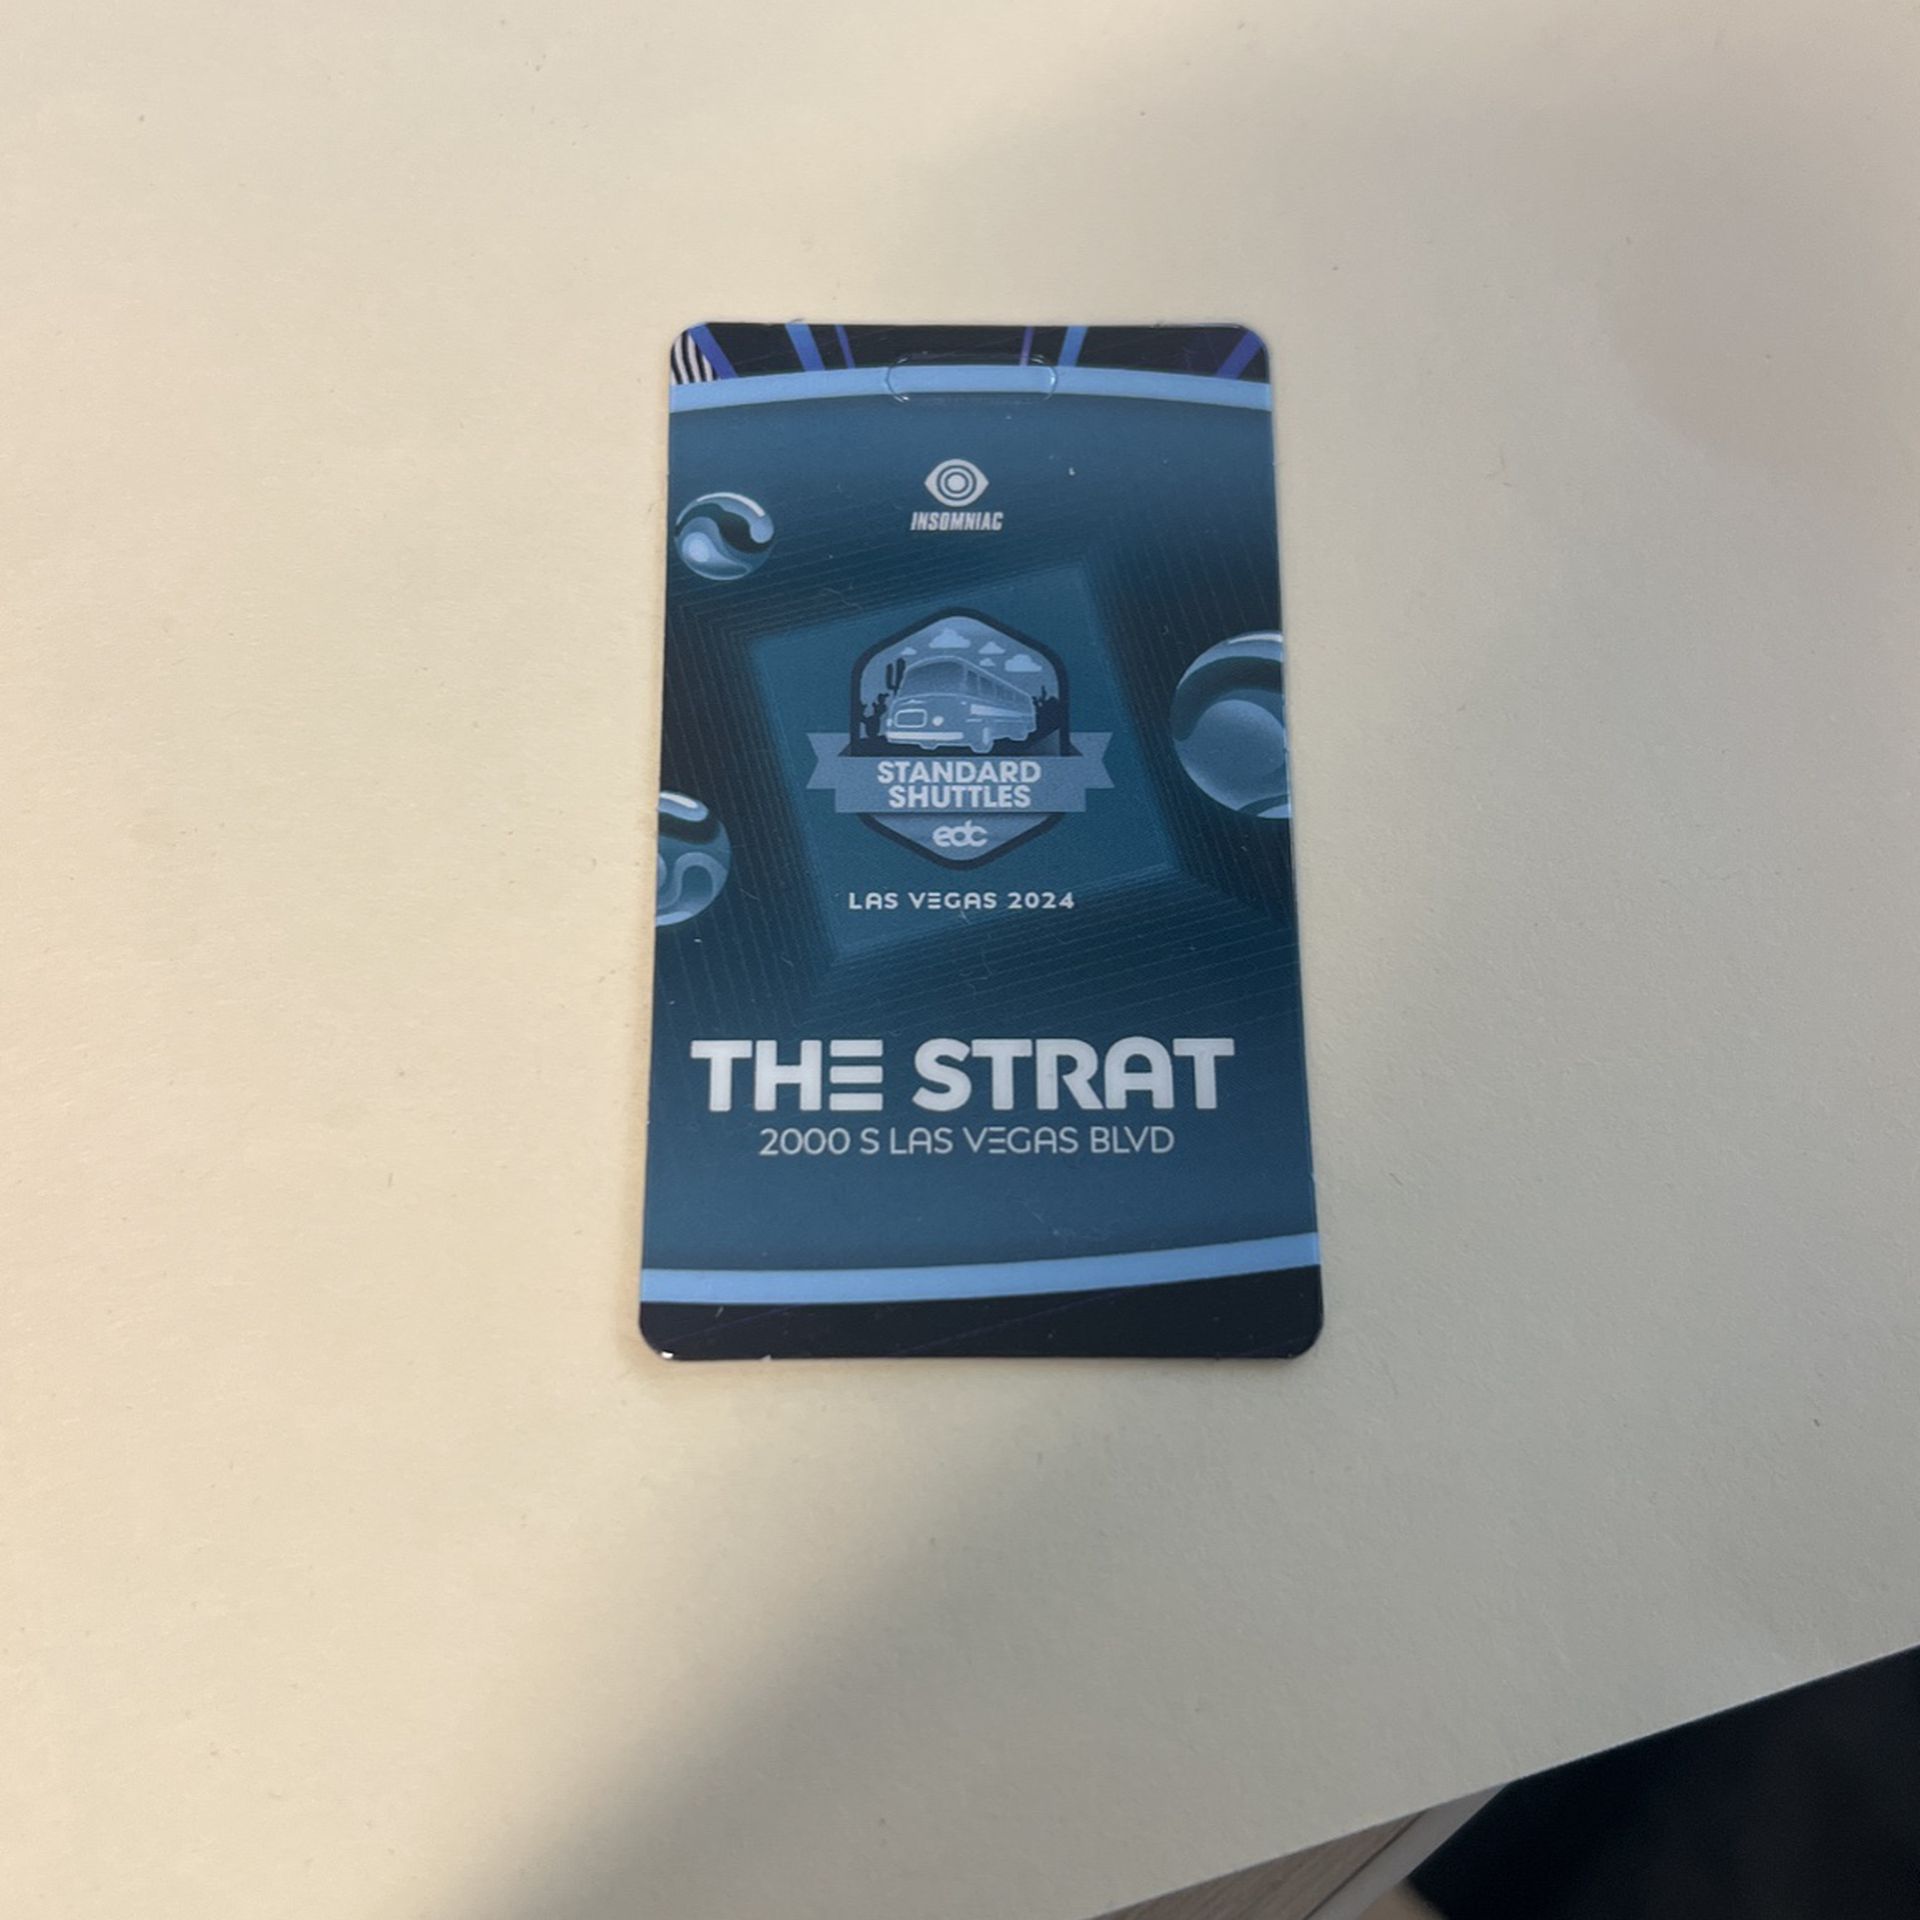 EDC shuttle pass at the Strat